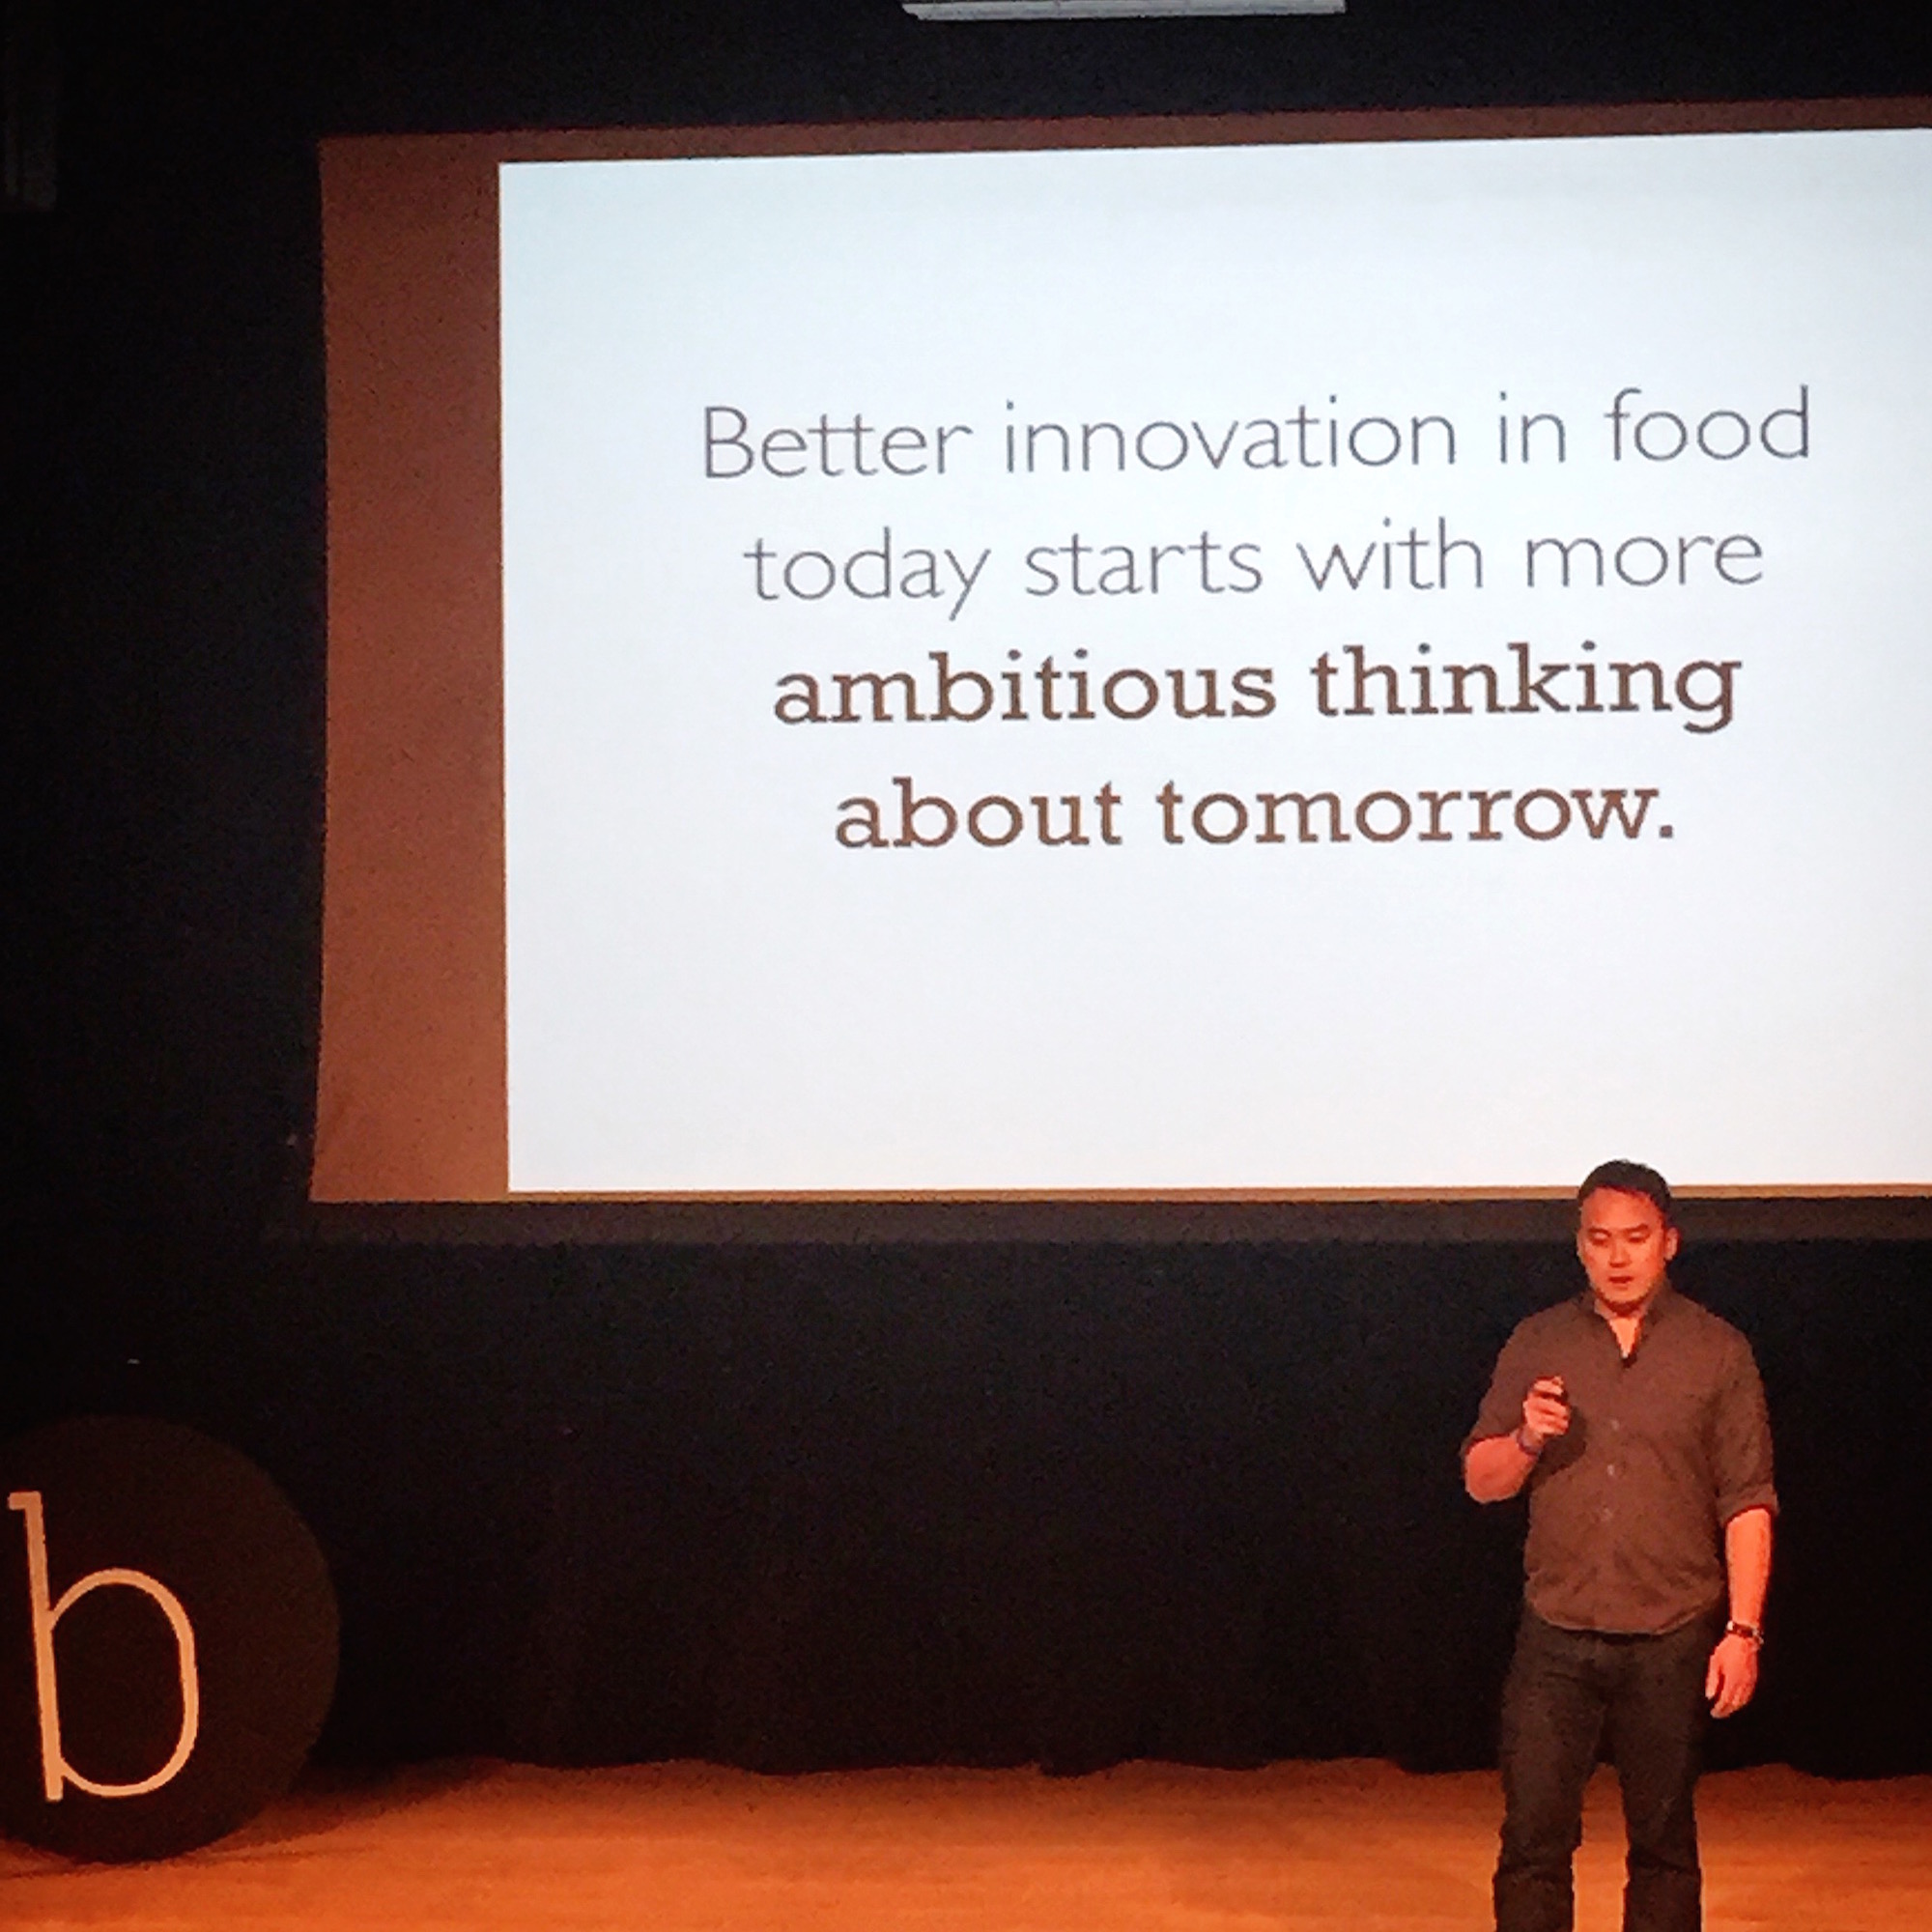 "Better innovation in food today starts with more ambitious thinking about tomorrow." - Mike Lee, The Future Market